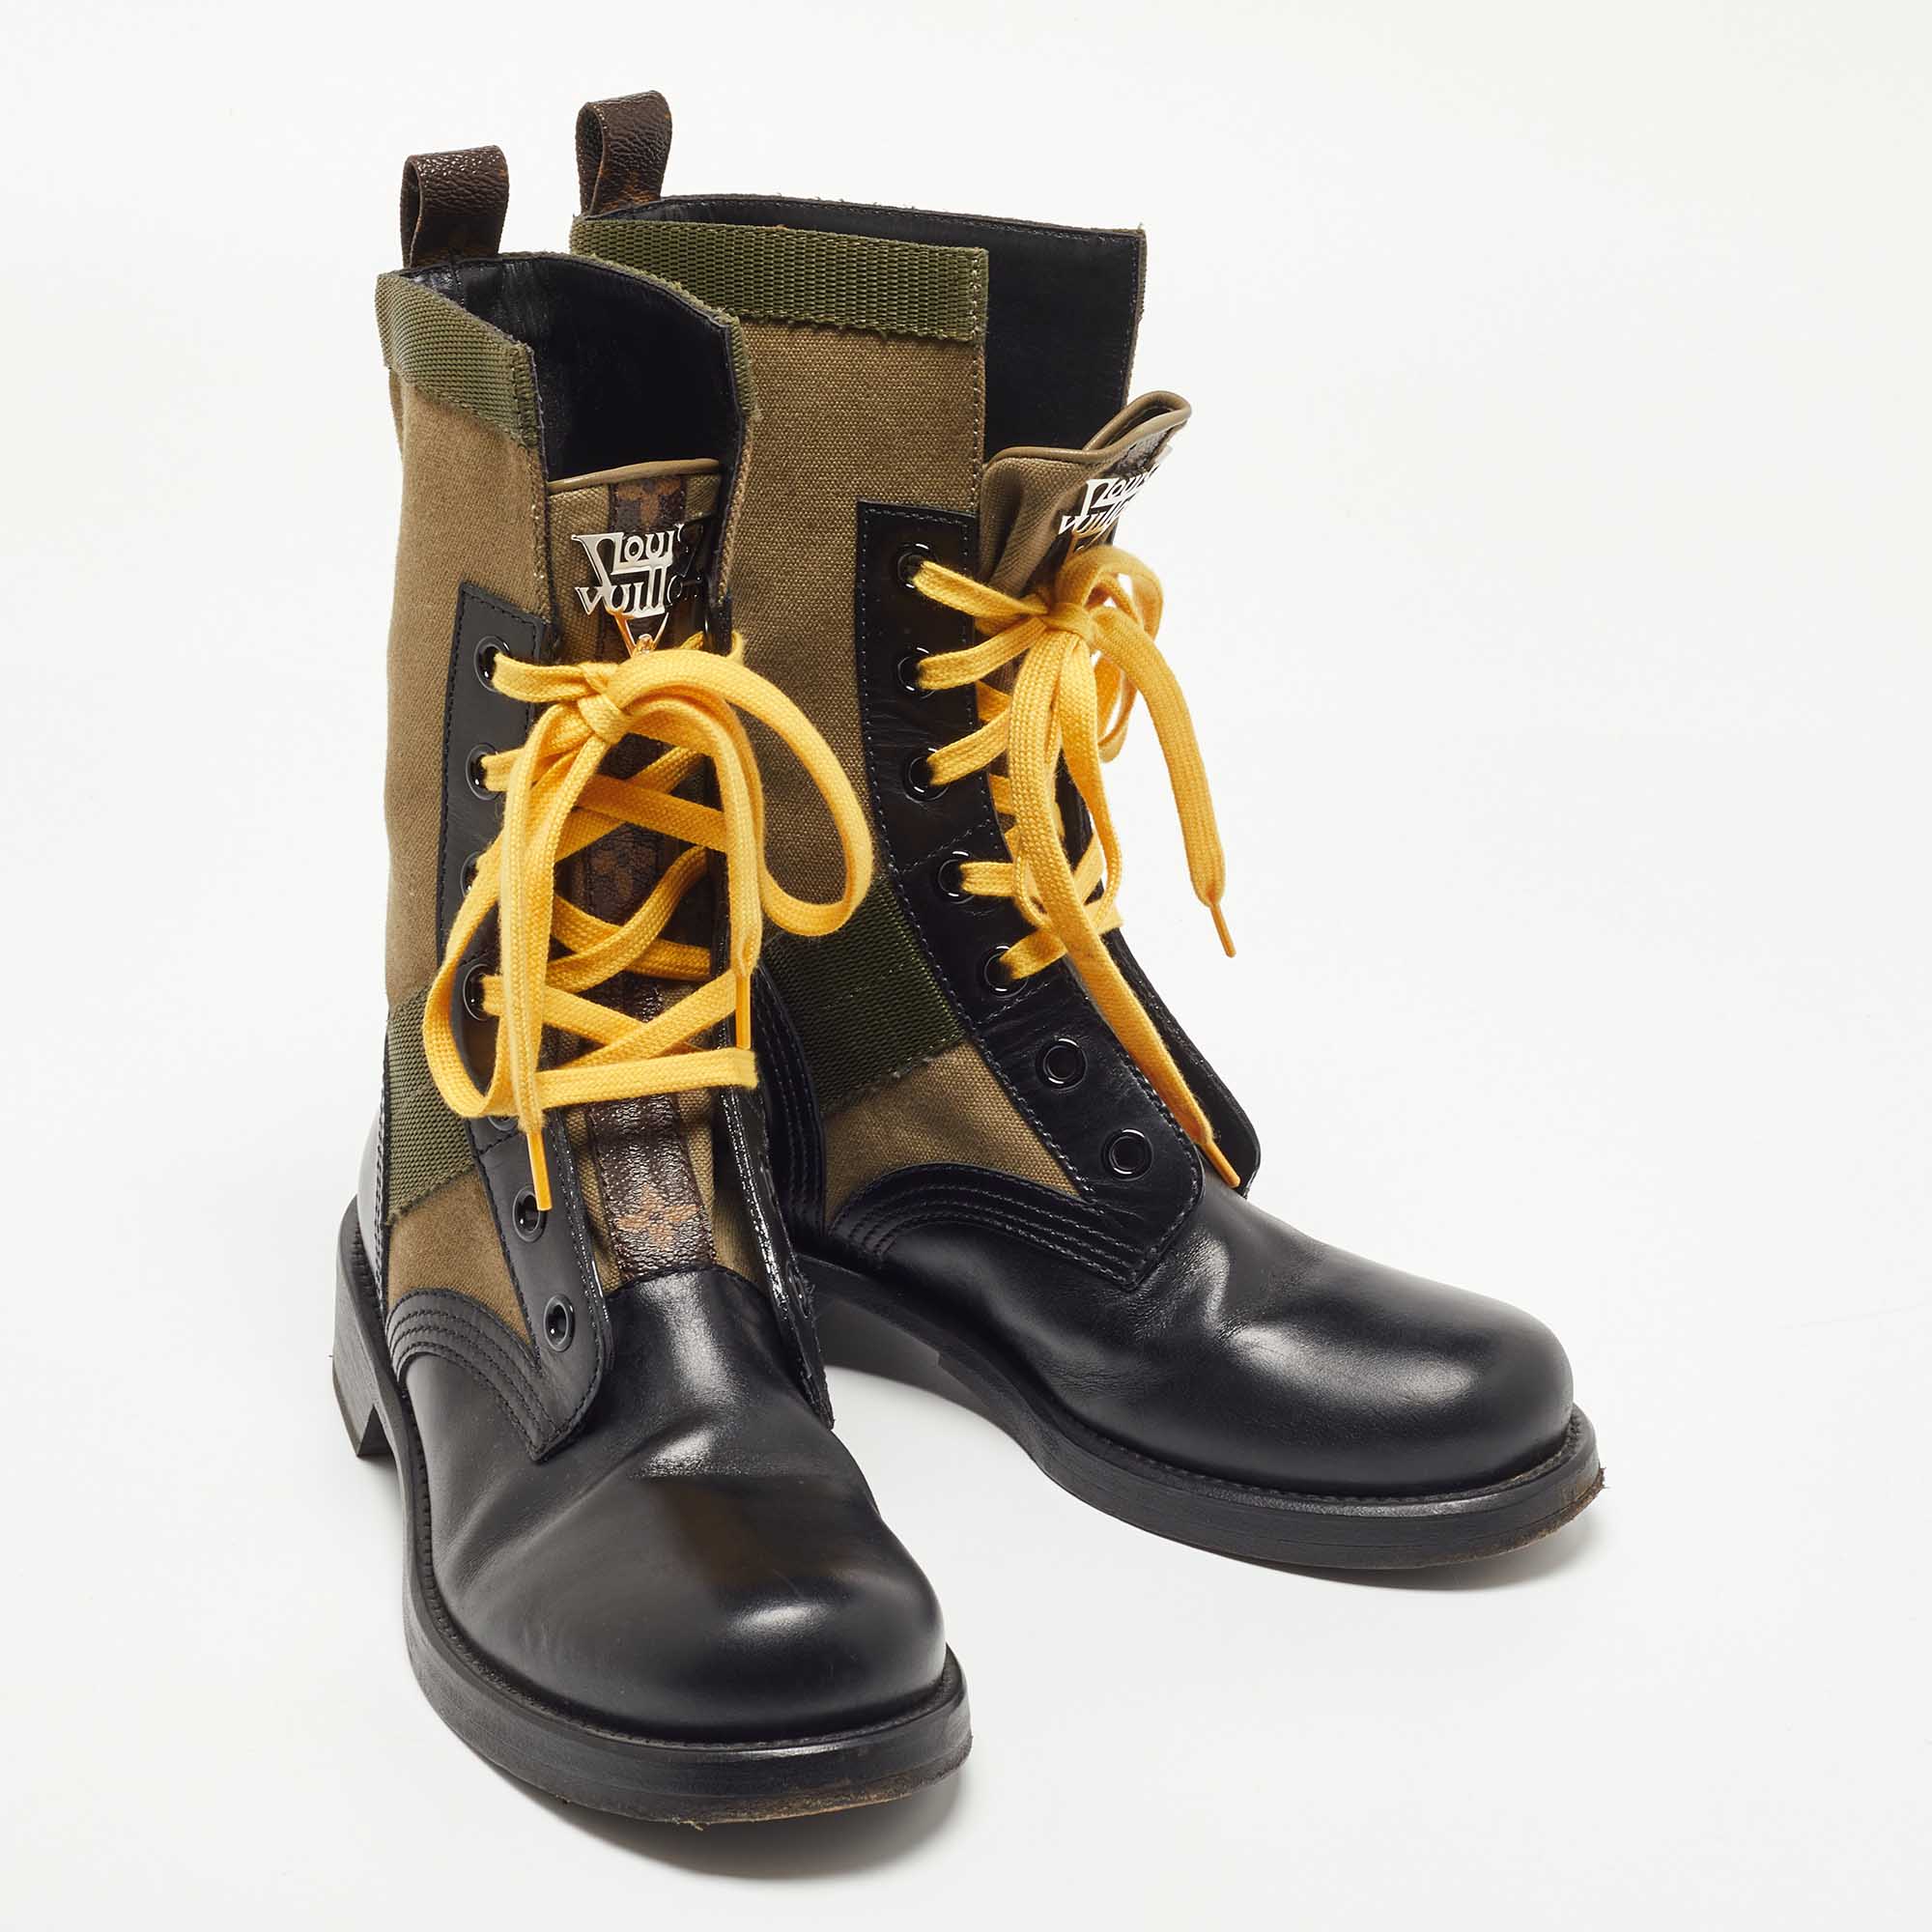 Louis Vuitton Green/Black Canvas And Leather Midcalf Boots Size 38.5